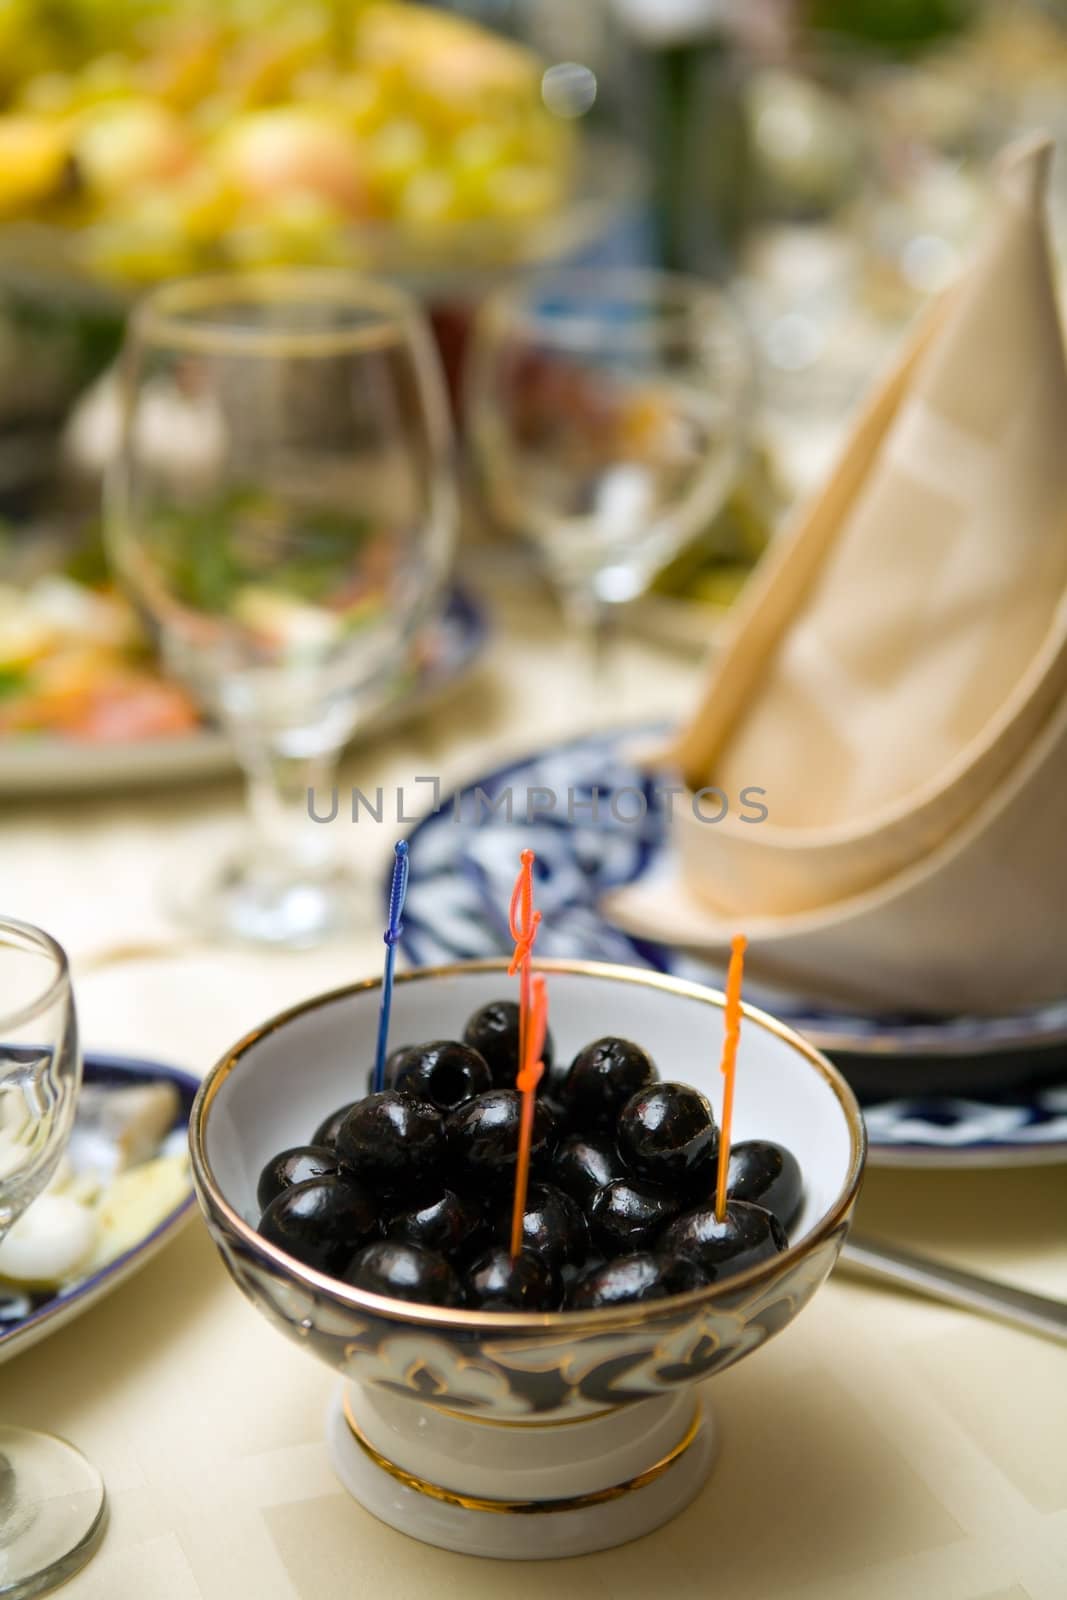 Plate with black olives on restaurant table